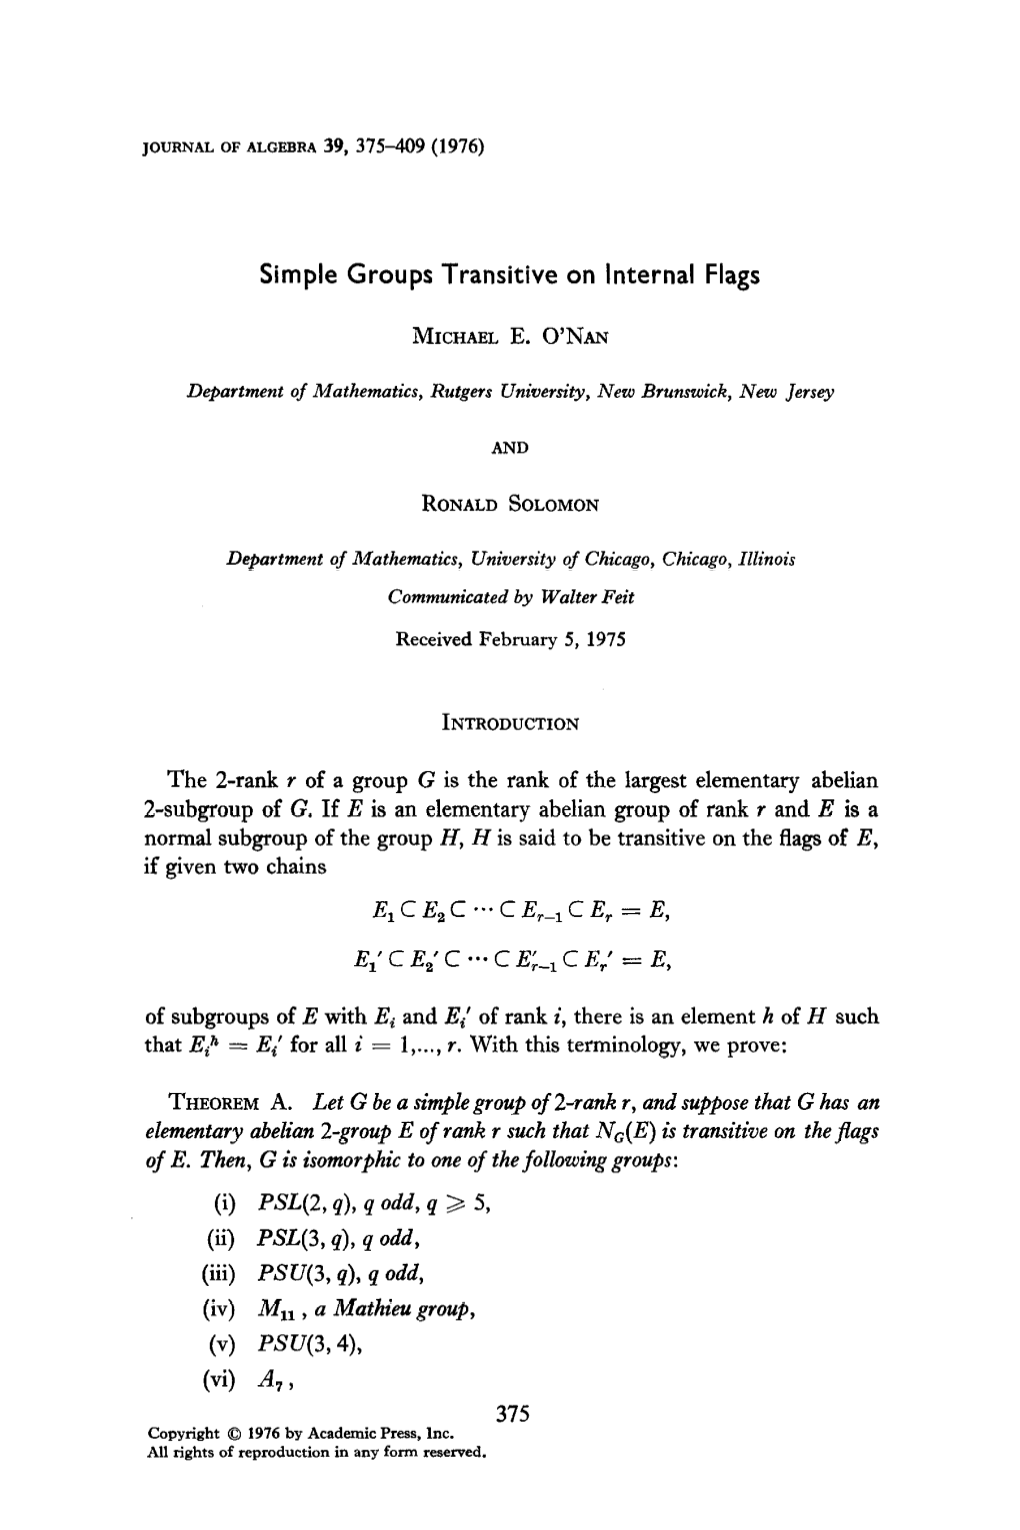 Simple Groups Transitive on Internal Flags